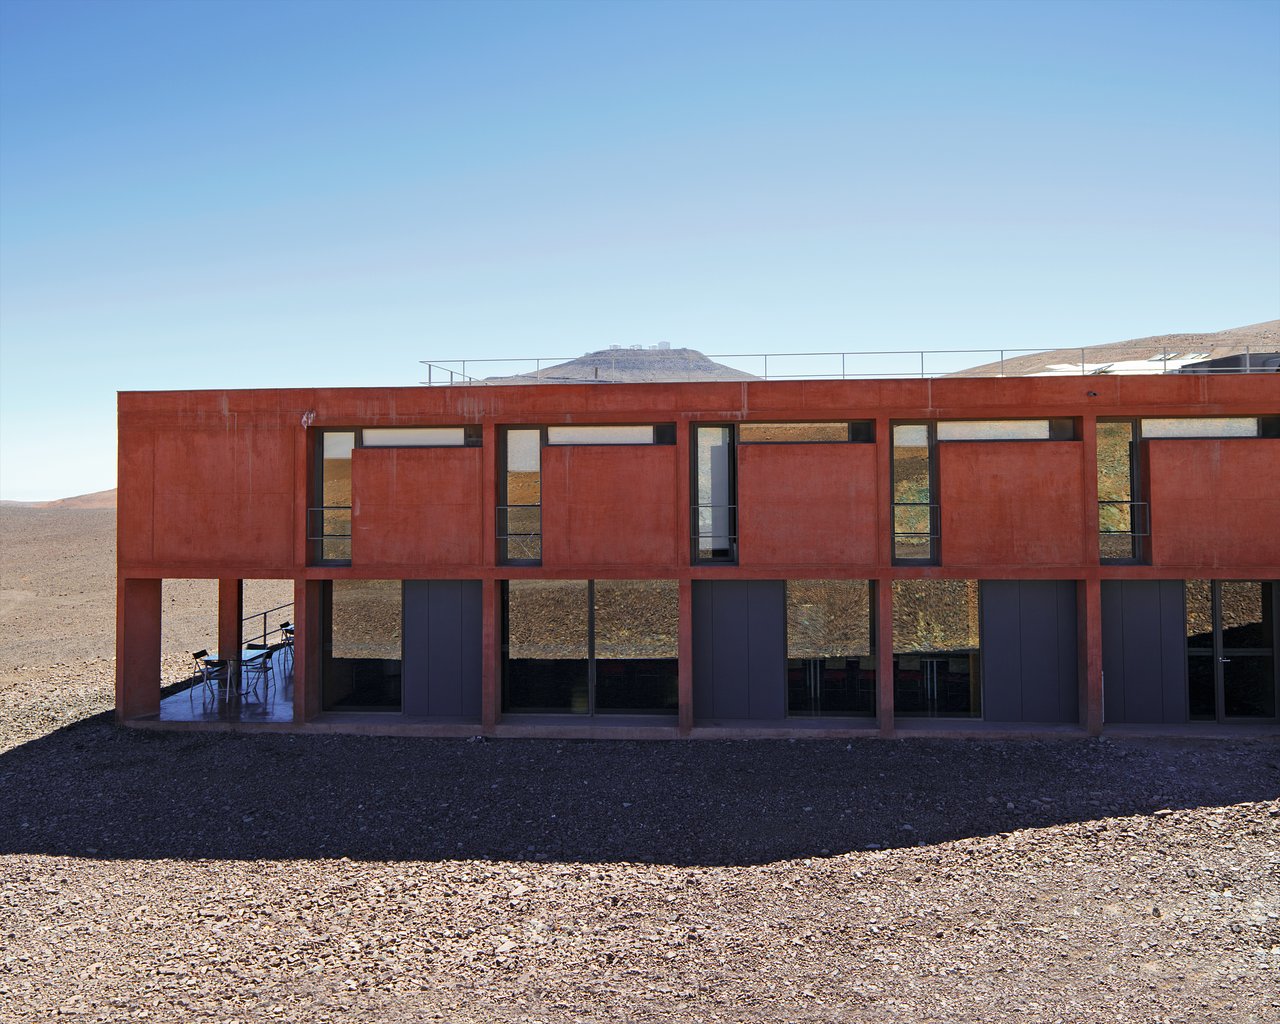 Building the Paranal Residencia — From turbulence to tranquility (present day image)